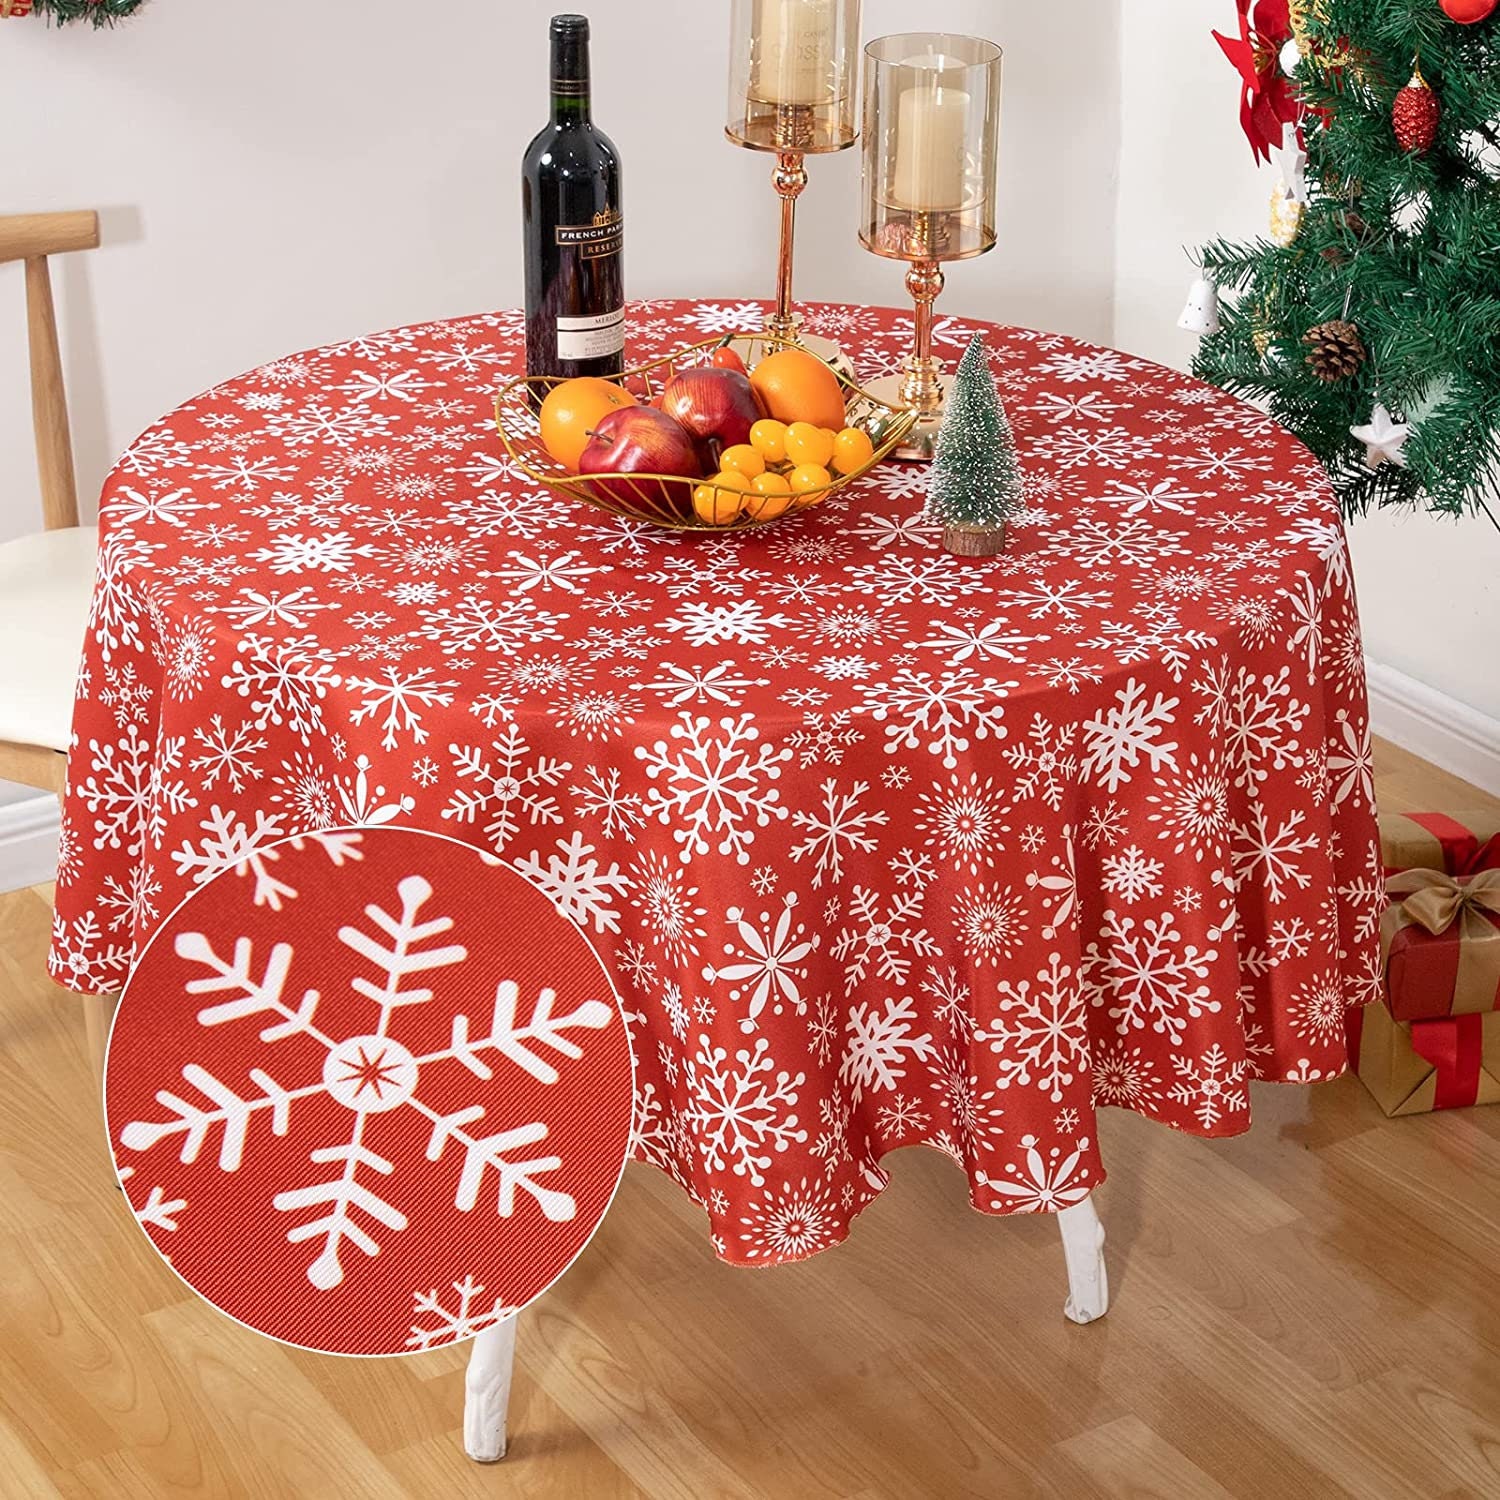 KLL Christmas Plaid Printed Lace Round Table Cloth 60 Diameter Table Cover  for Picnic, Dinning, Home Decor, Table, Party